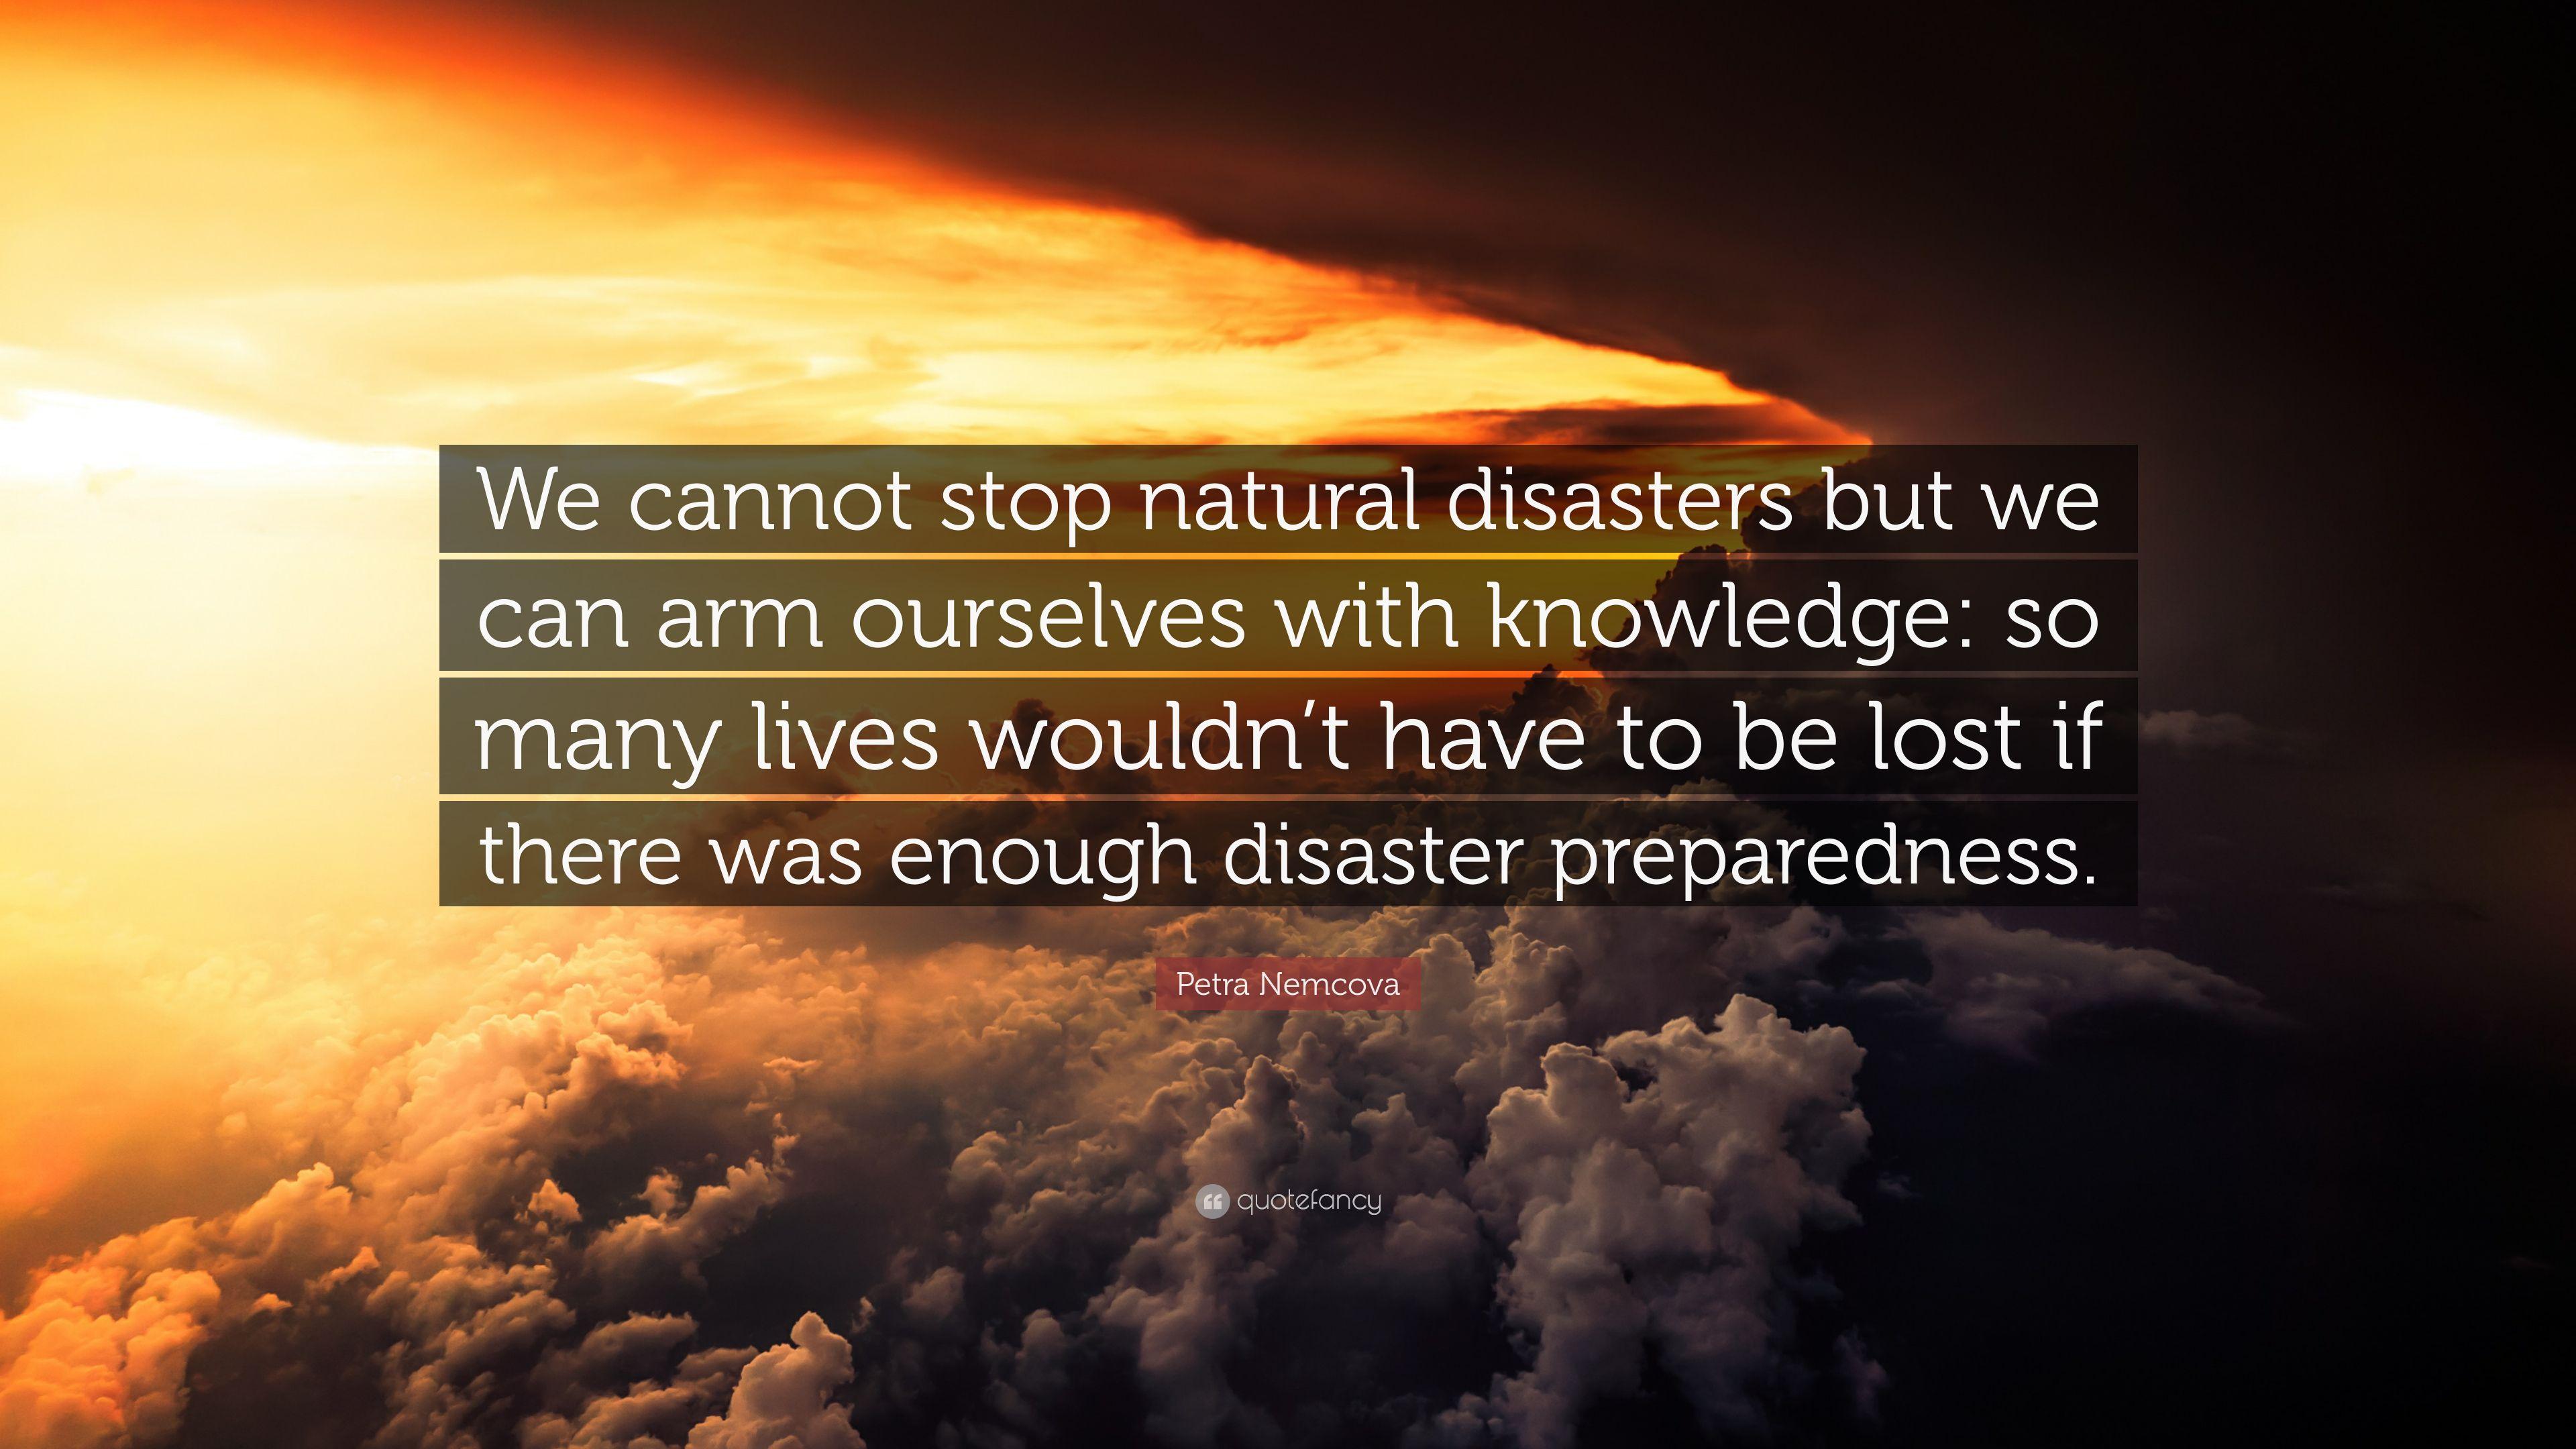 Petra Nemcova Quote: “We cannot stop natural disasters but we can arm ourselves with knowledge: so many lives wouldn't have to be lost if ther.” (9 wallpaper)